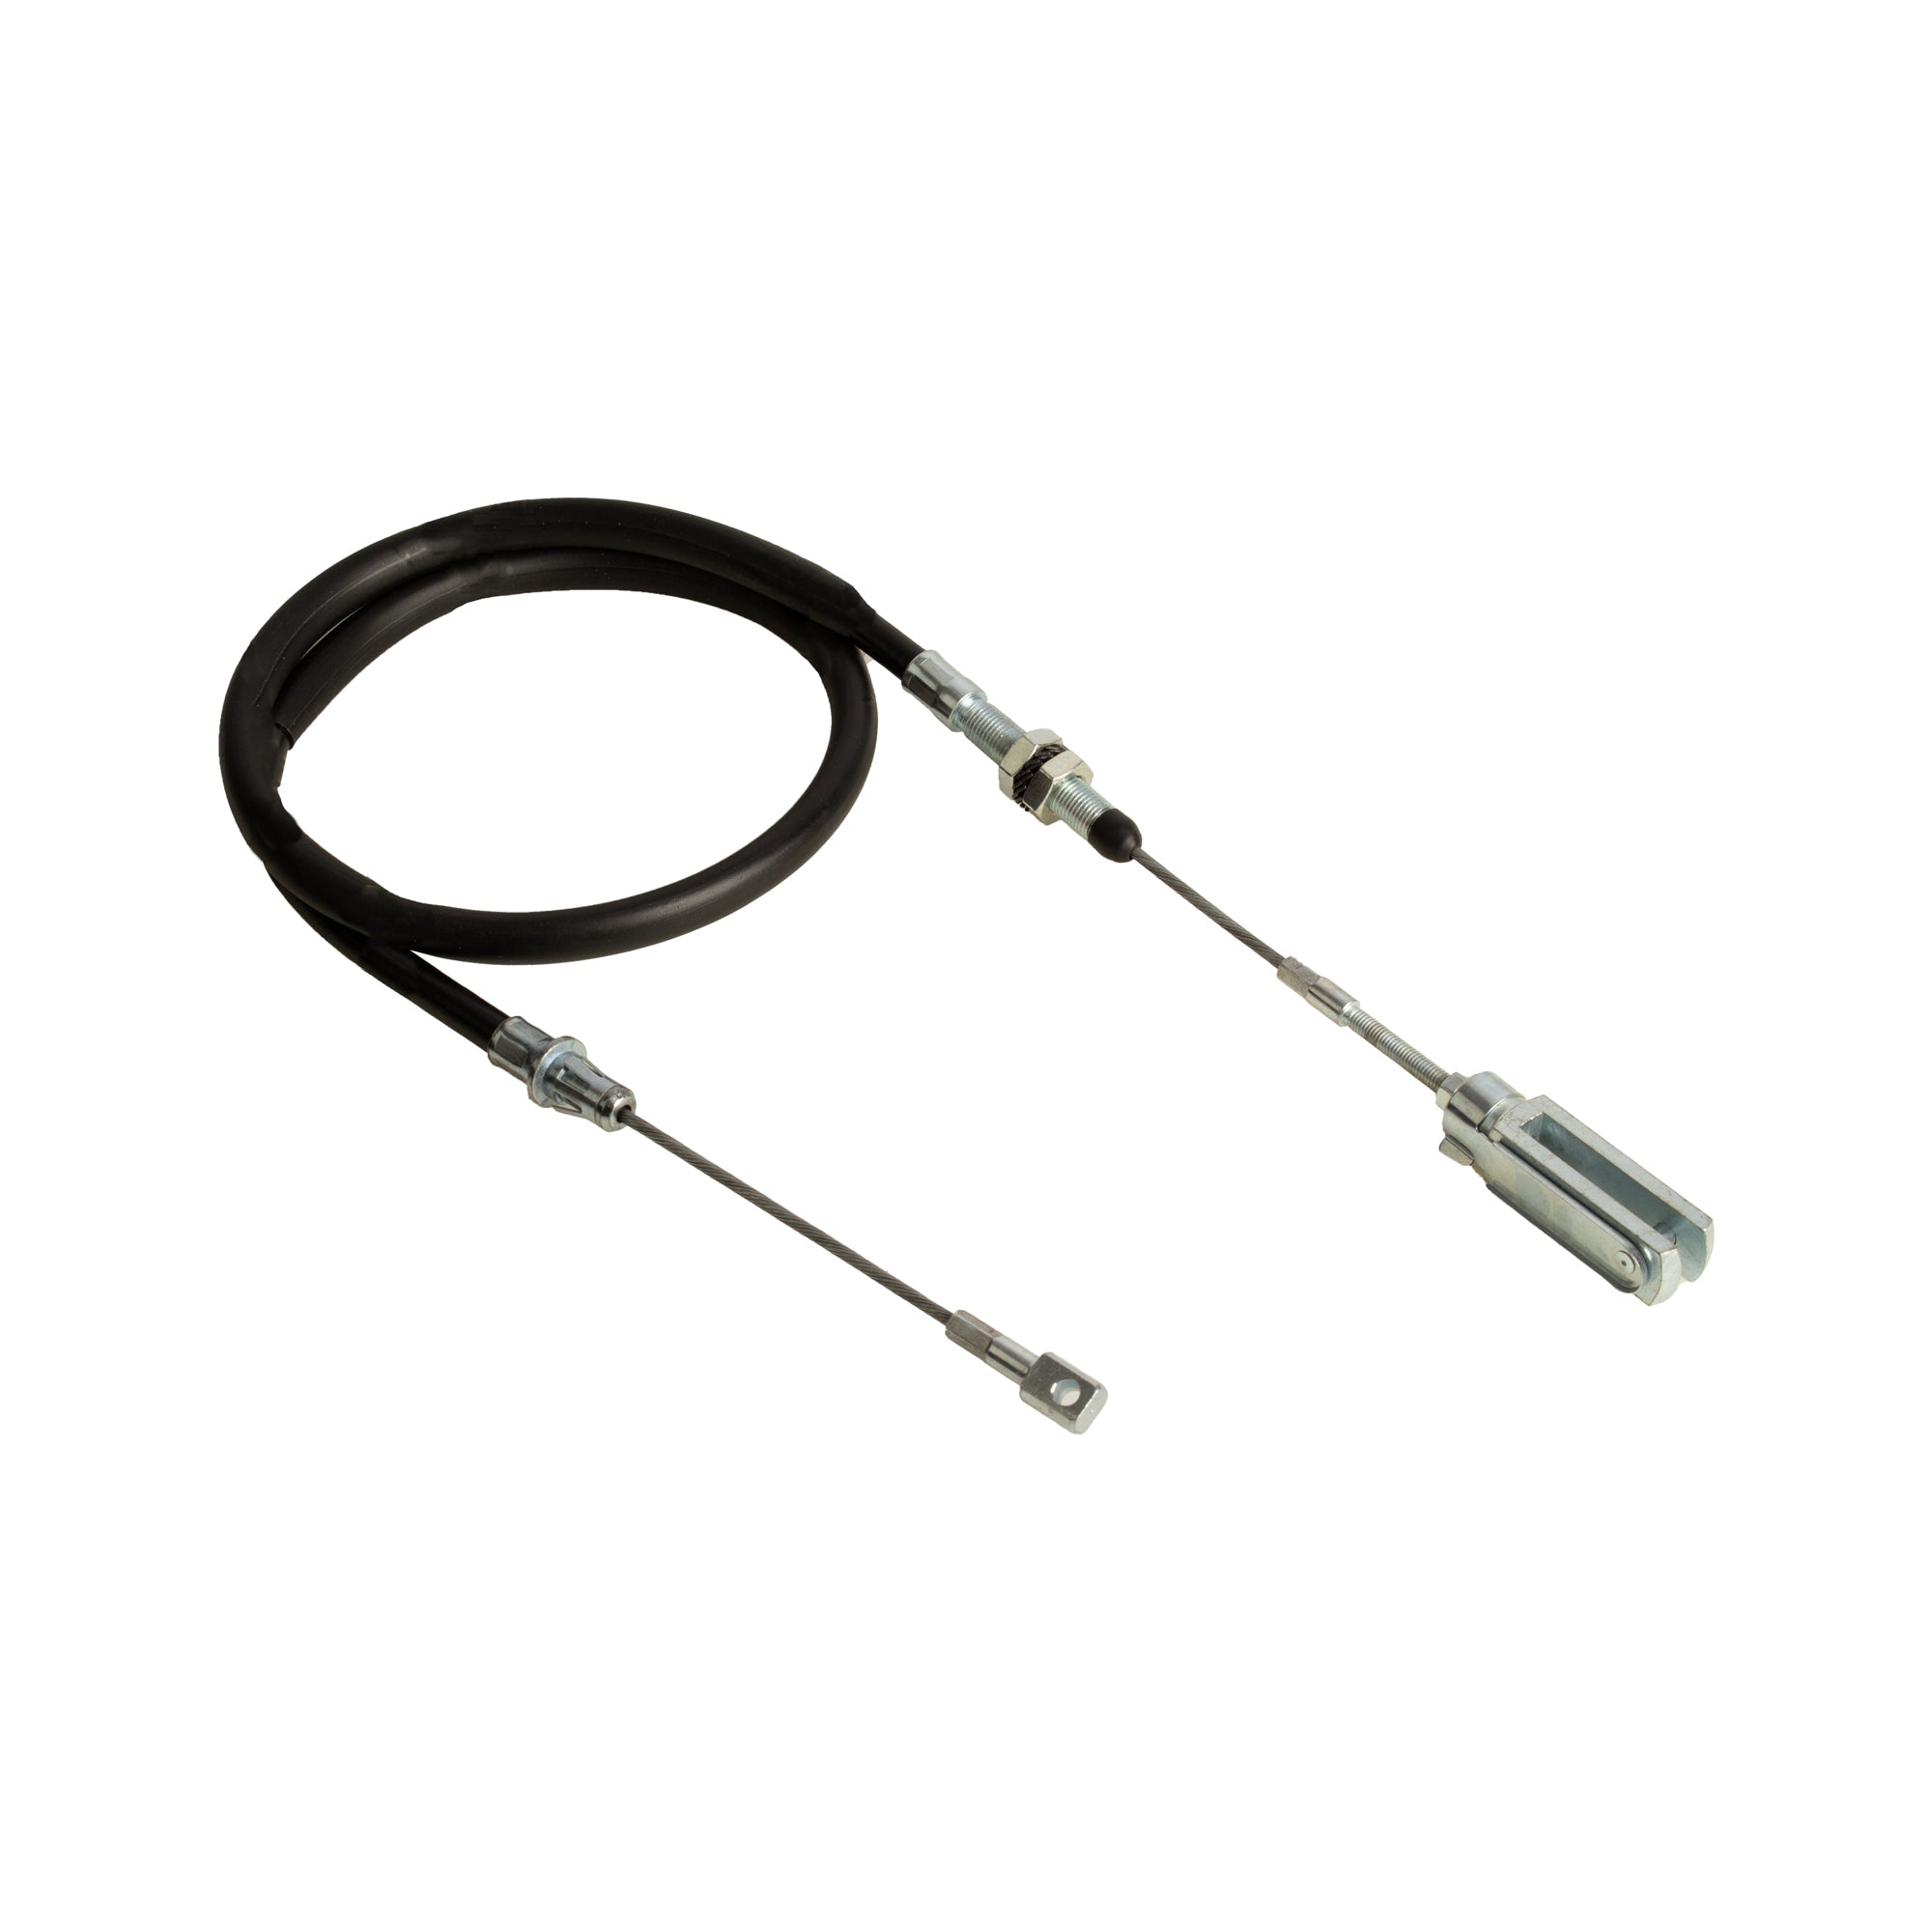 PTO Cable Replacement for FORD NEW HOLLAND CASE IH Tractor Models TD 85 84146528